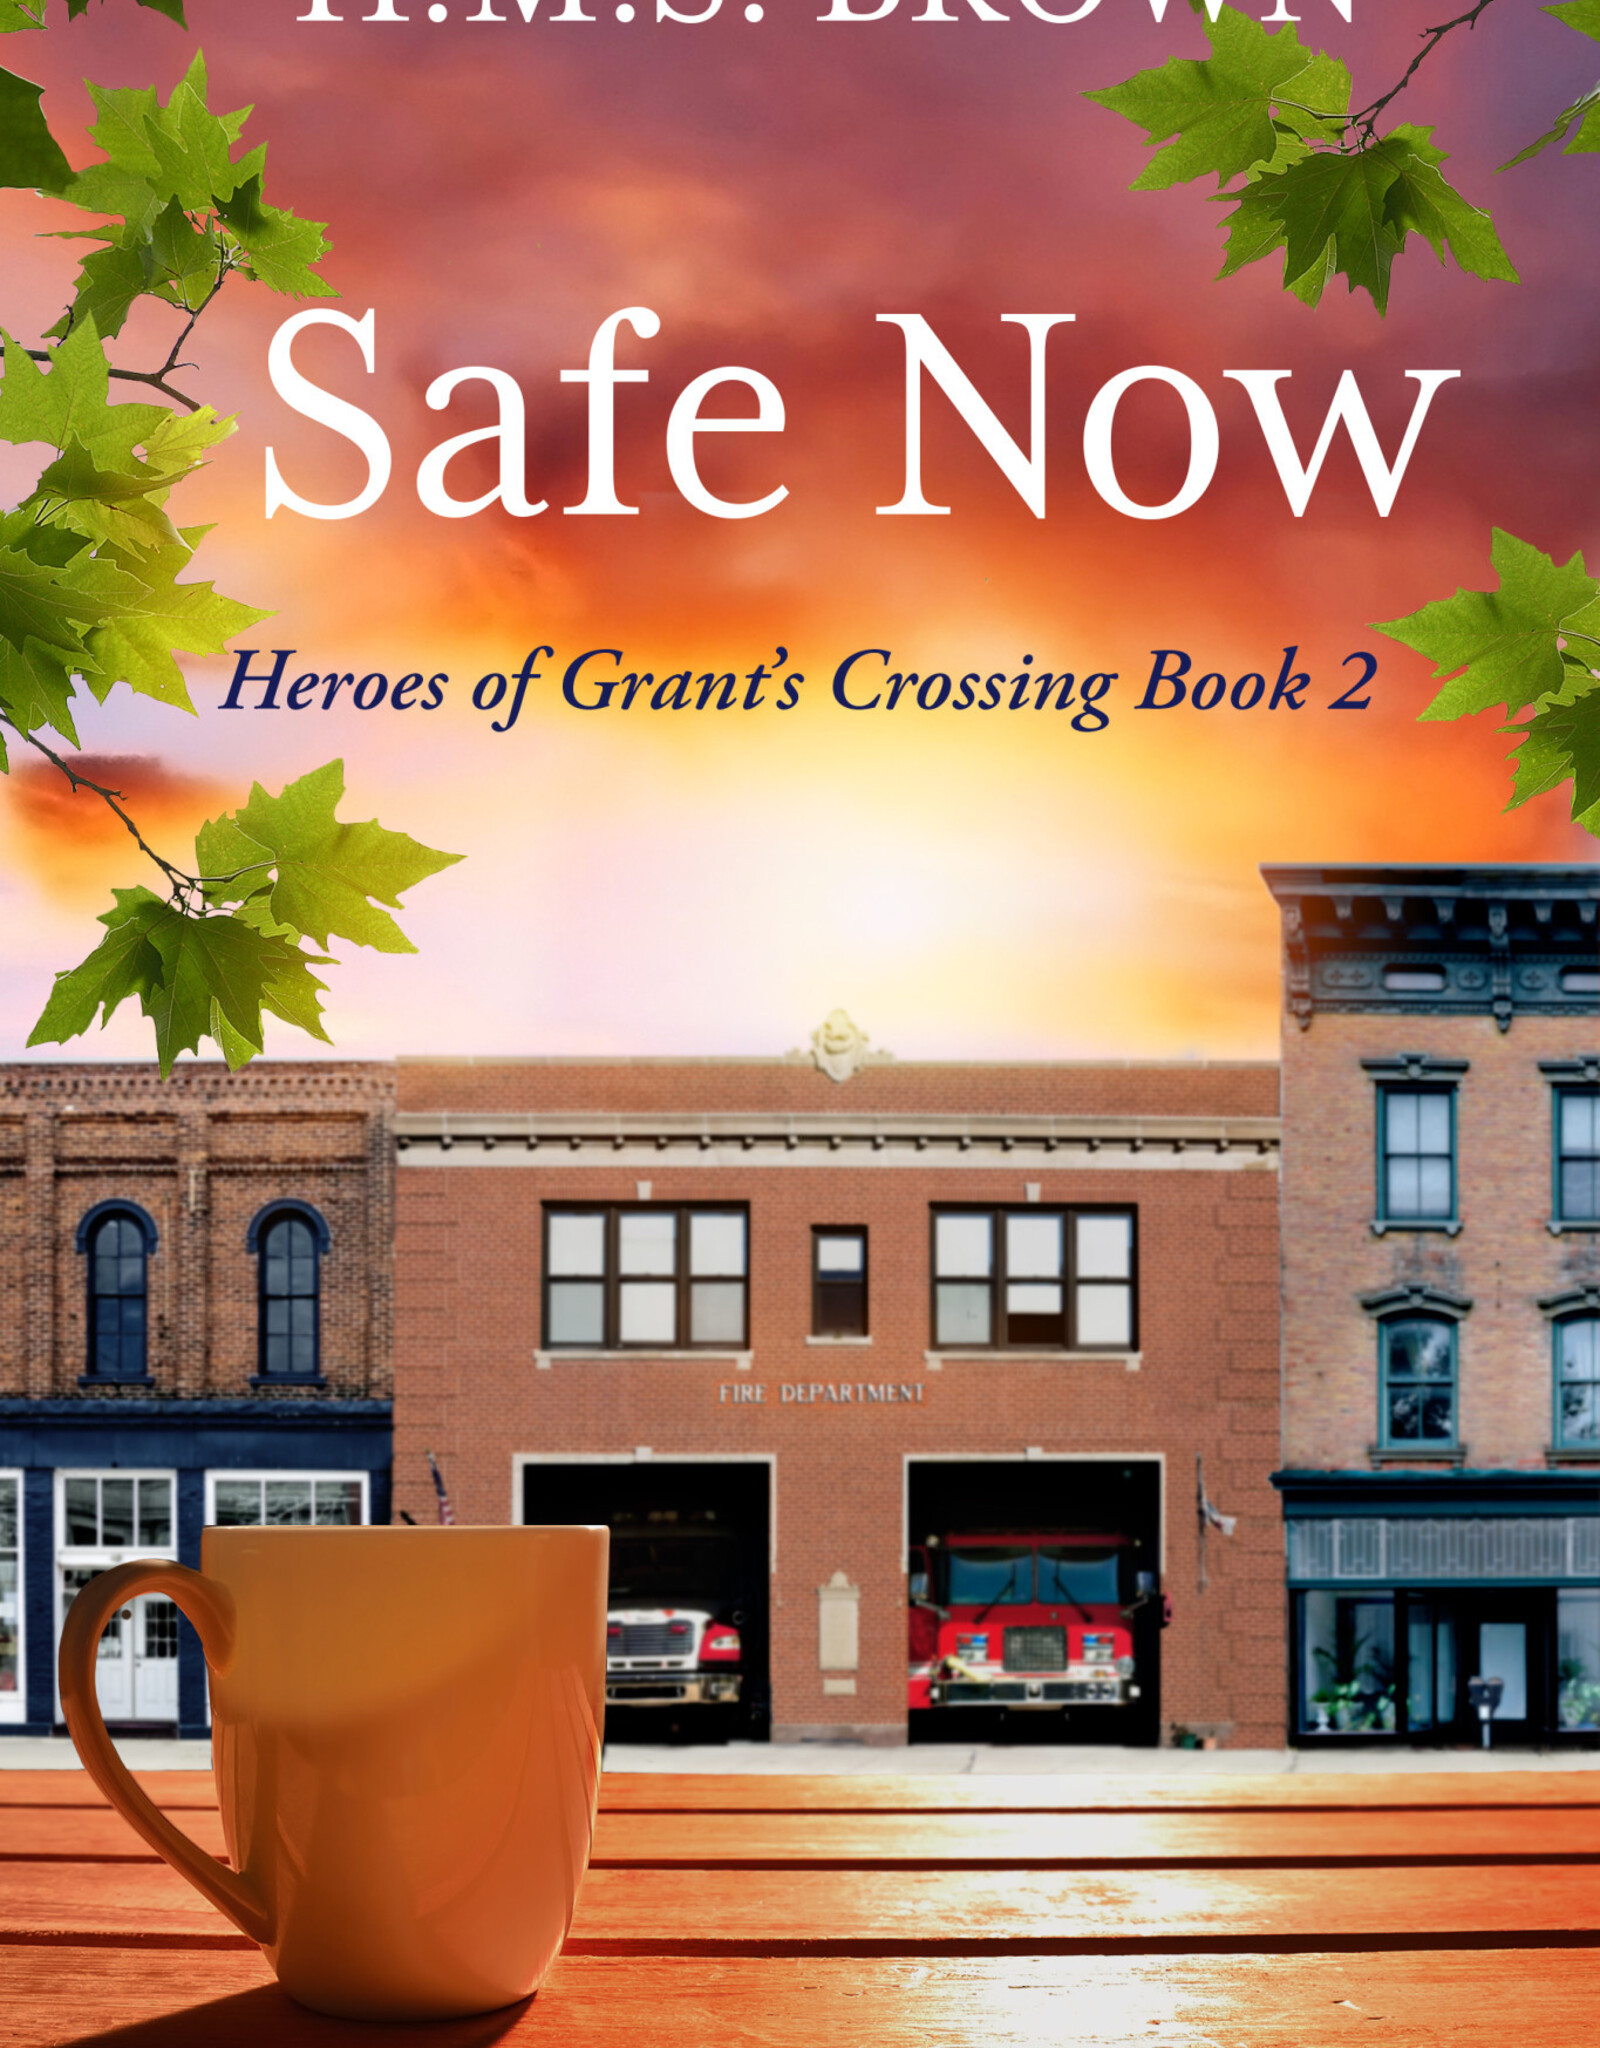 Safe Now - Heroes of Grant's Crossing Book 2 by H.M.S. Brown